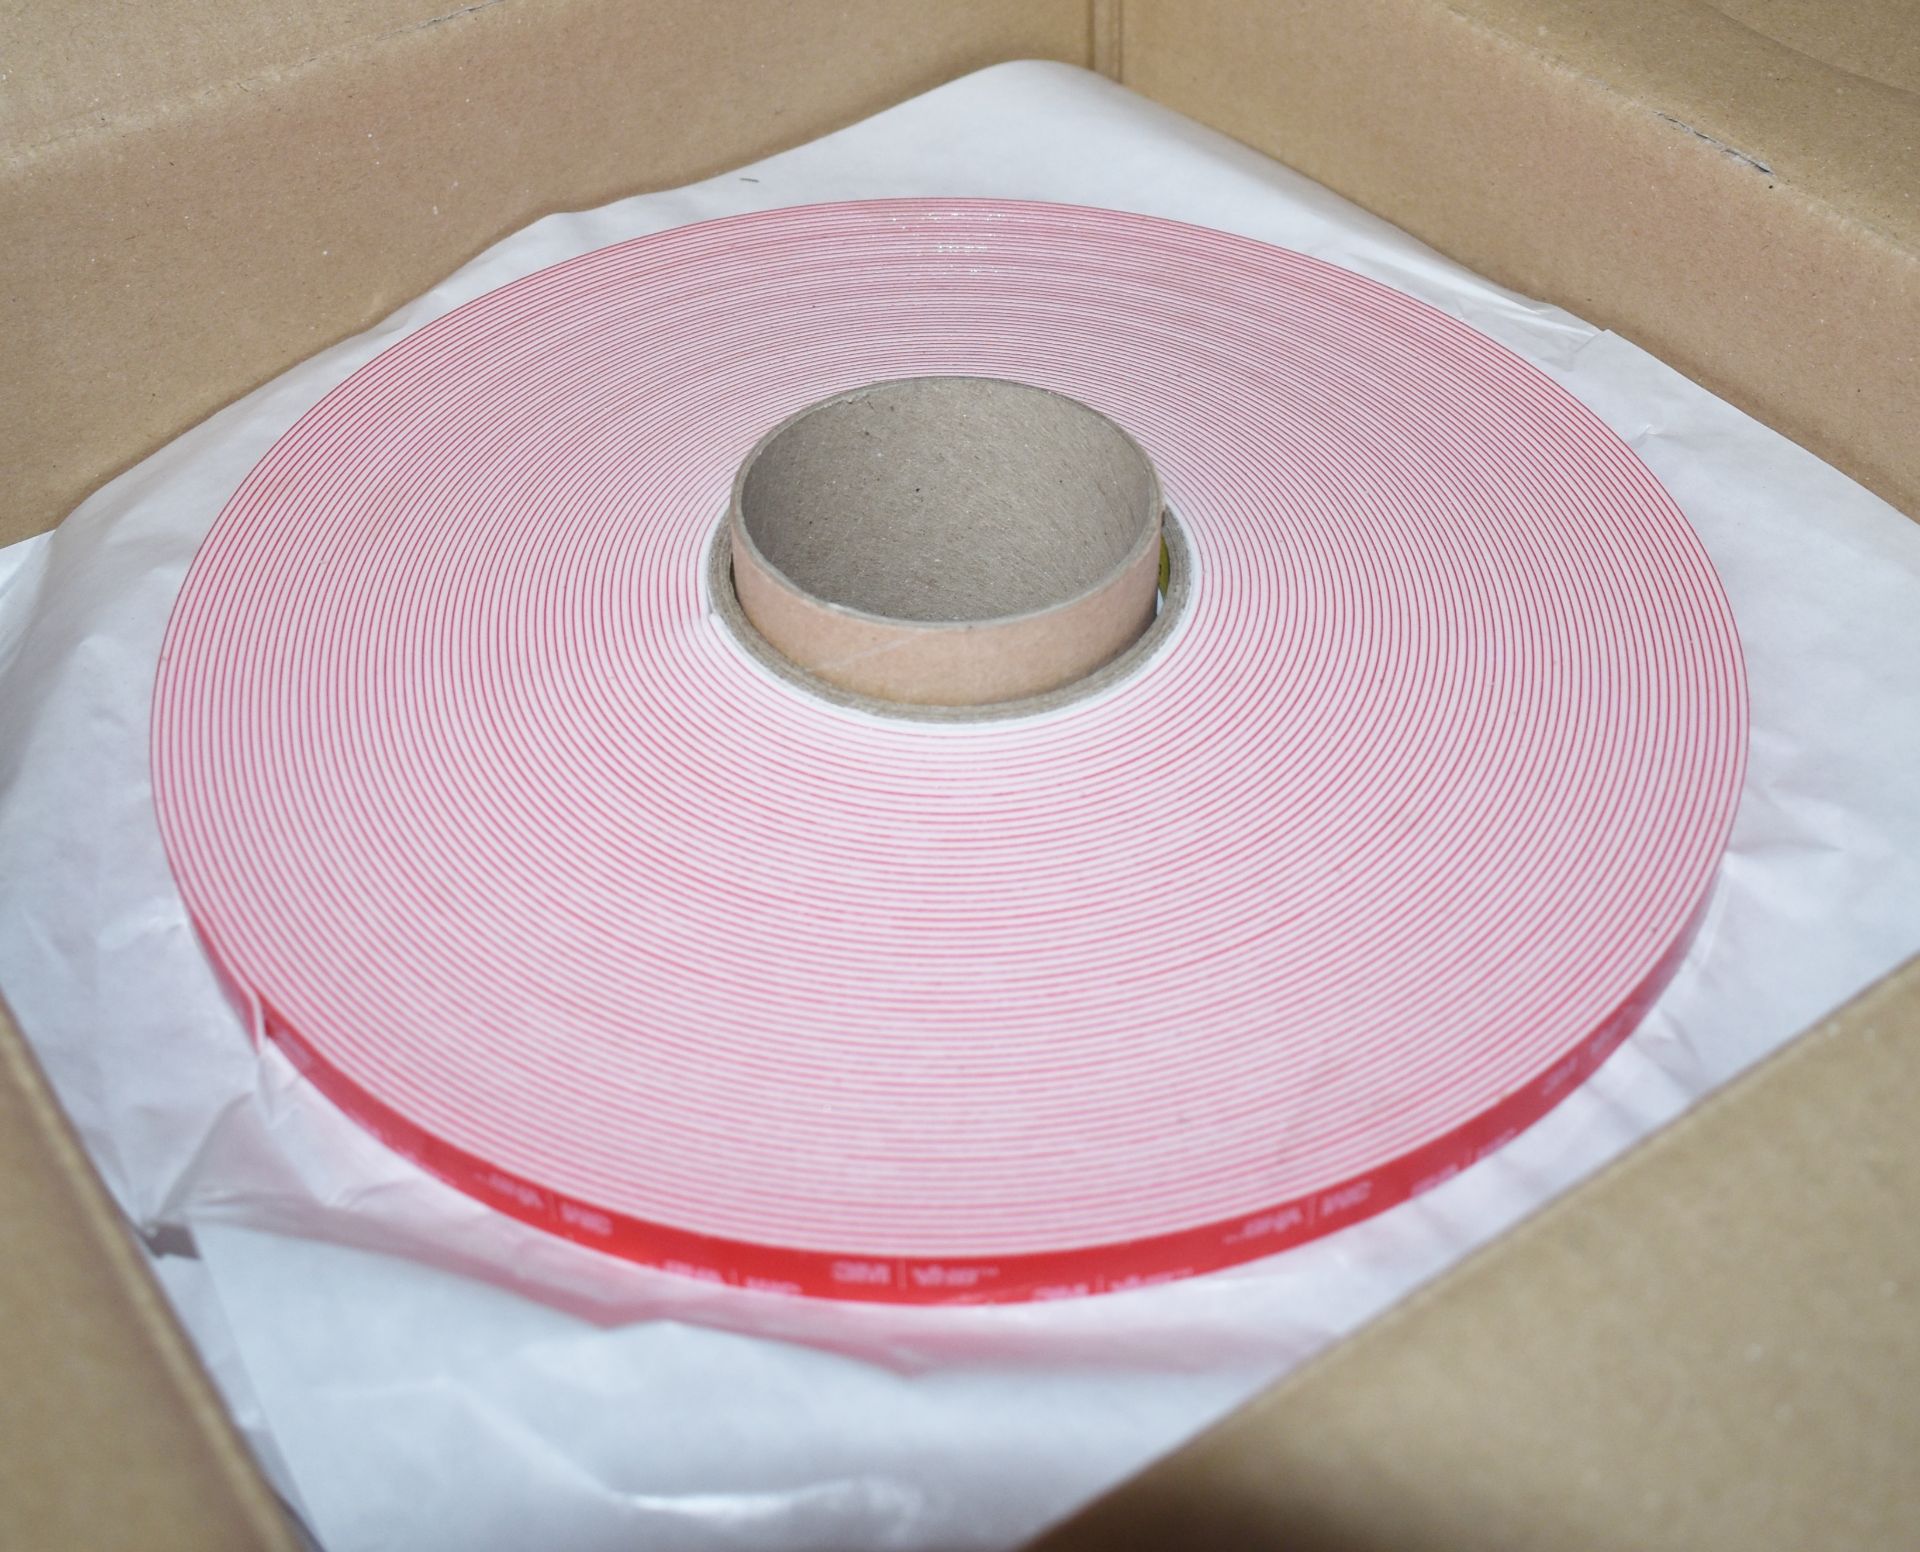 18 x Rolls of 3M VHB Double Sided Acrylic Adhesive Foam Core Tape - Type LSE-160WF - RRP £756 - - Image 5 of 5